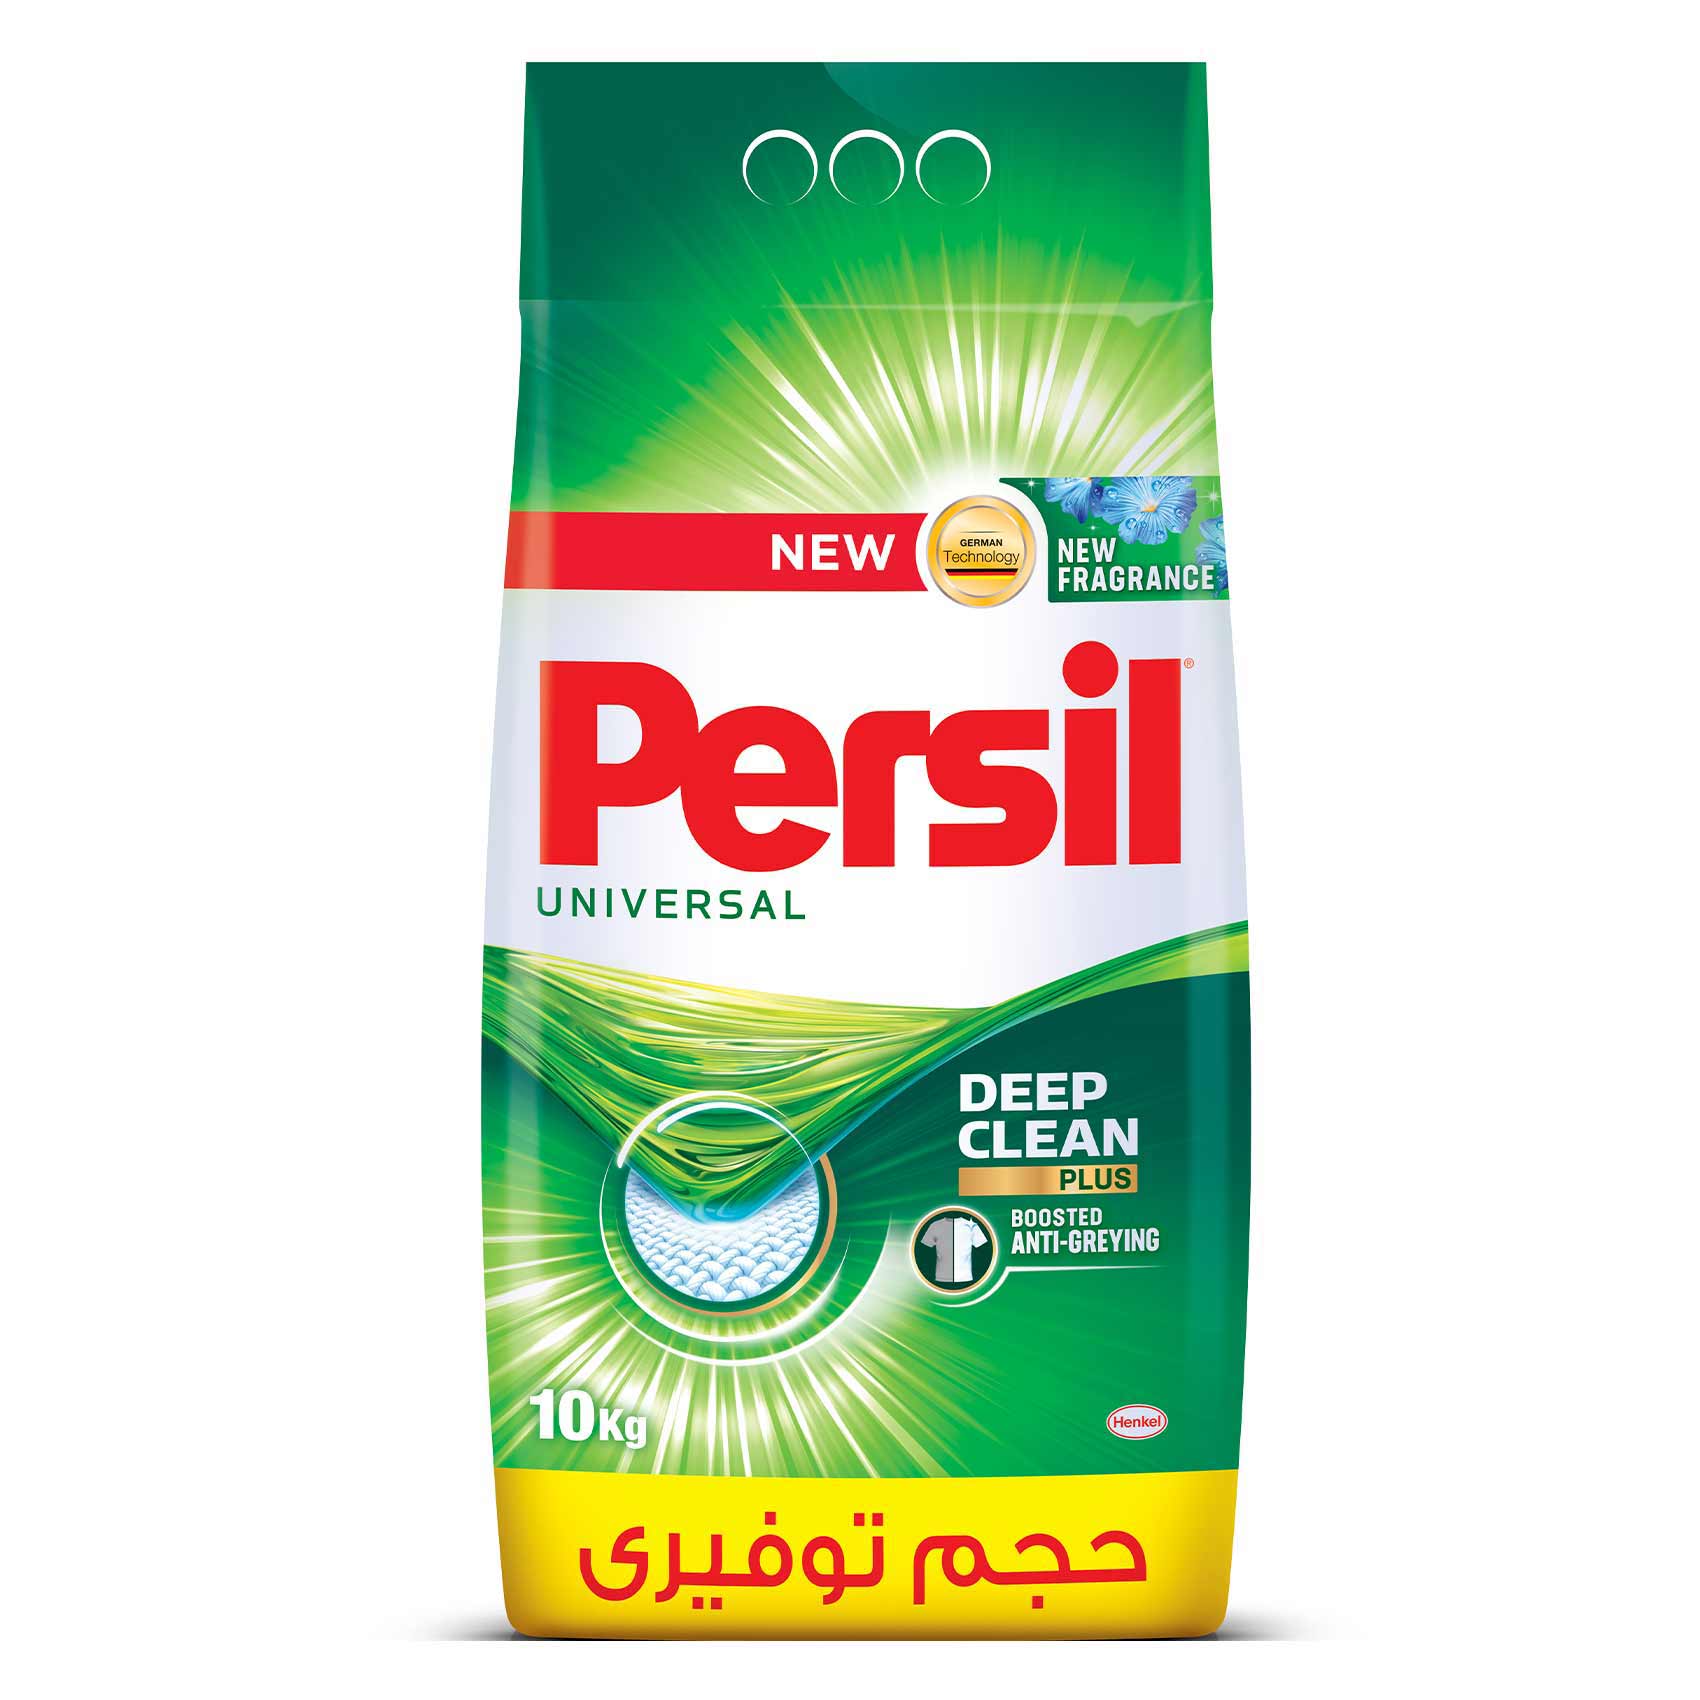 Persil Universal Powder Laundry Detergent With Deep Clean Plus 10KG